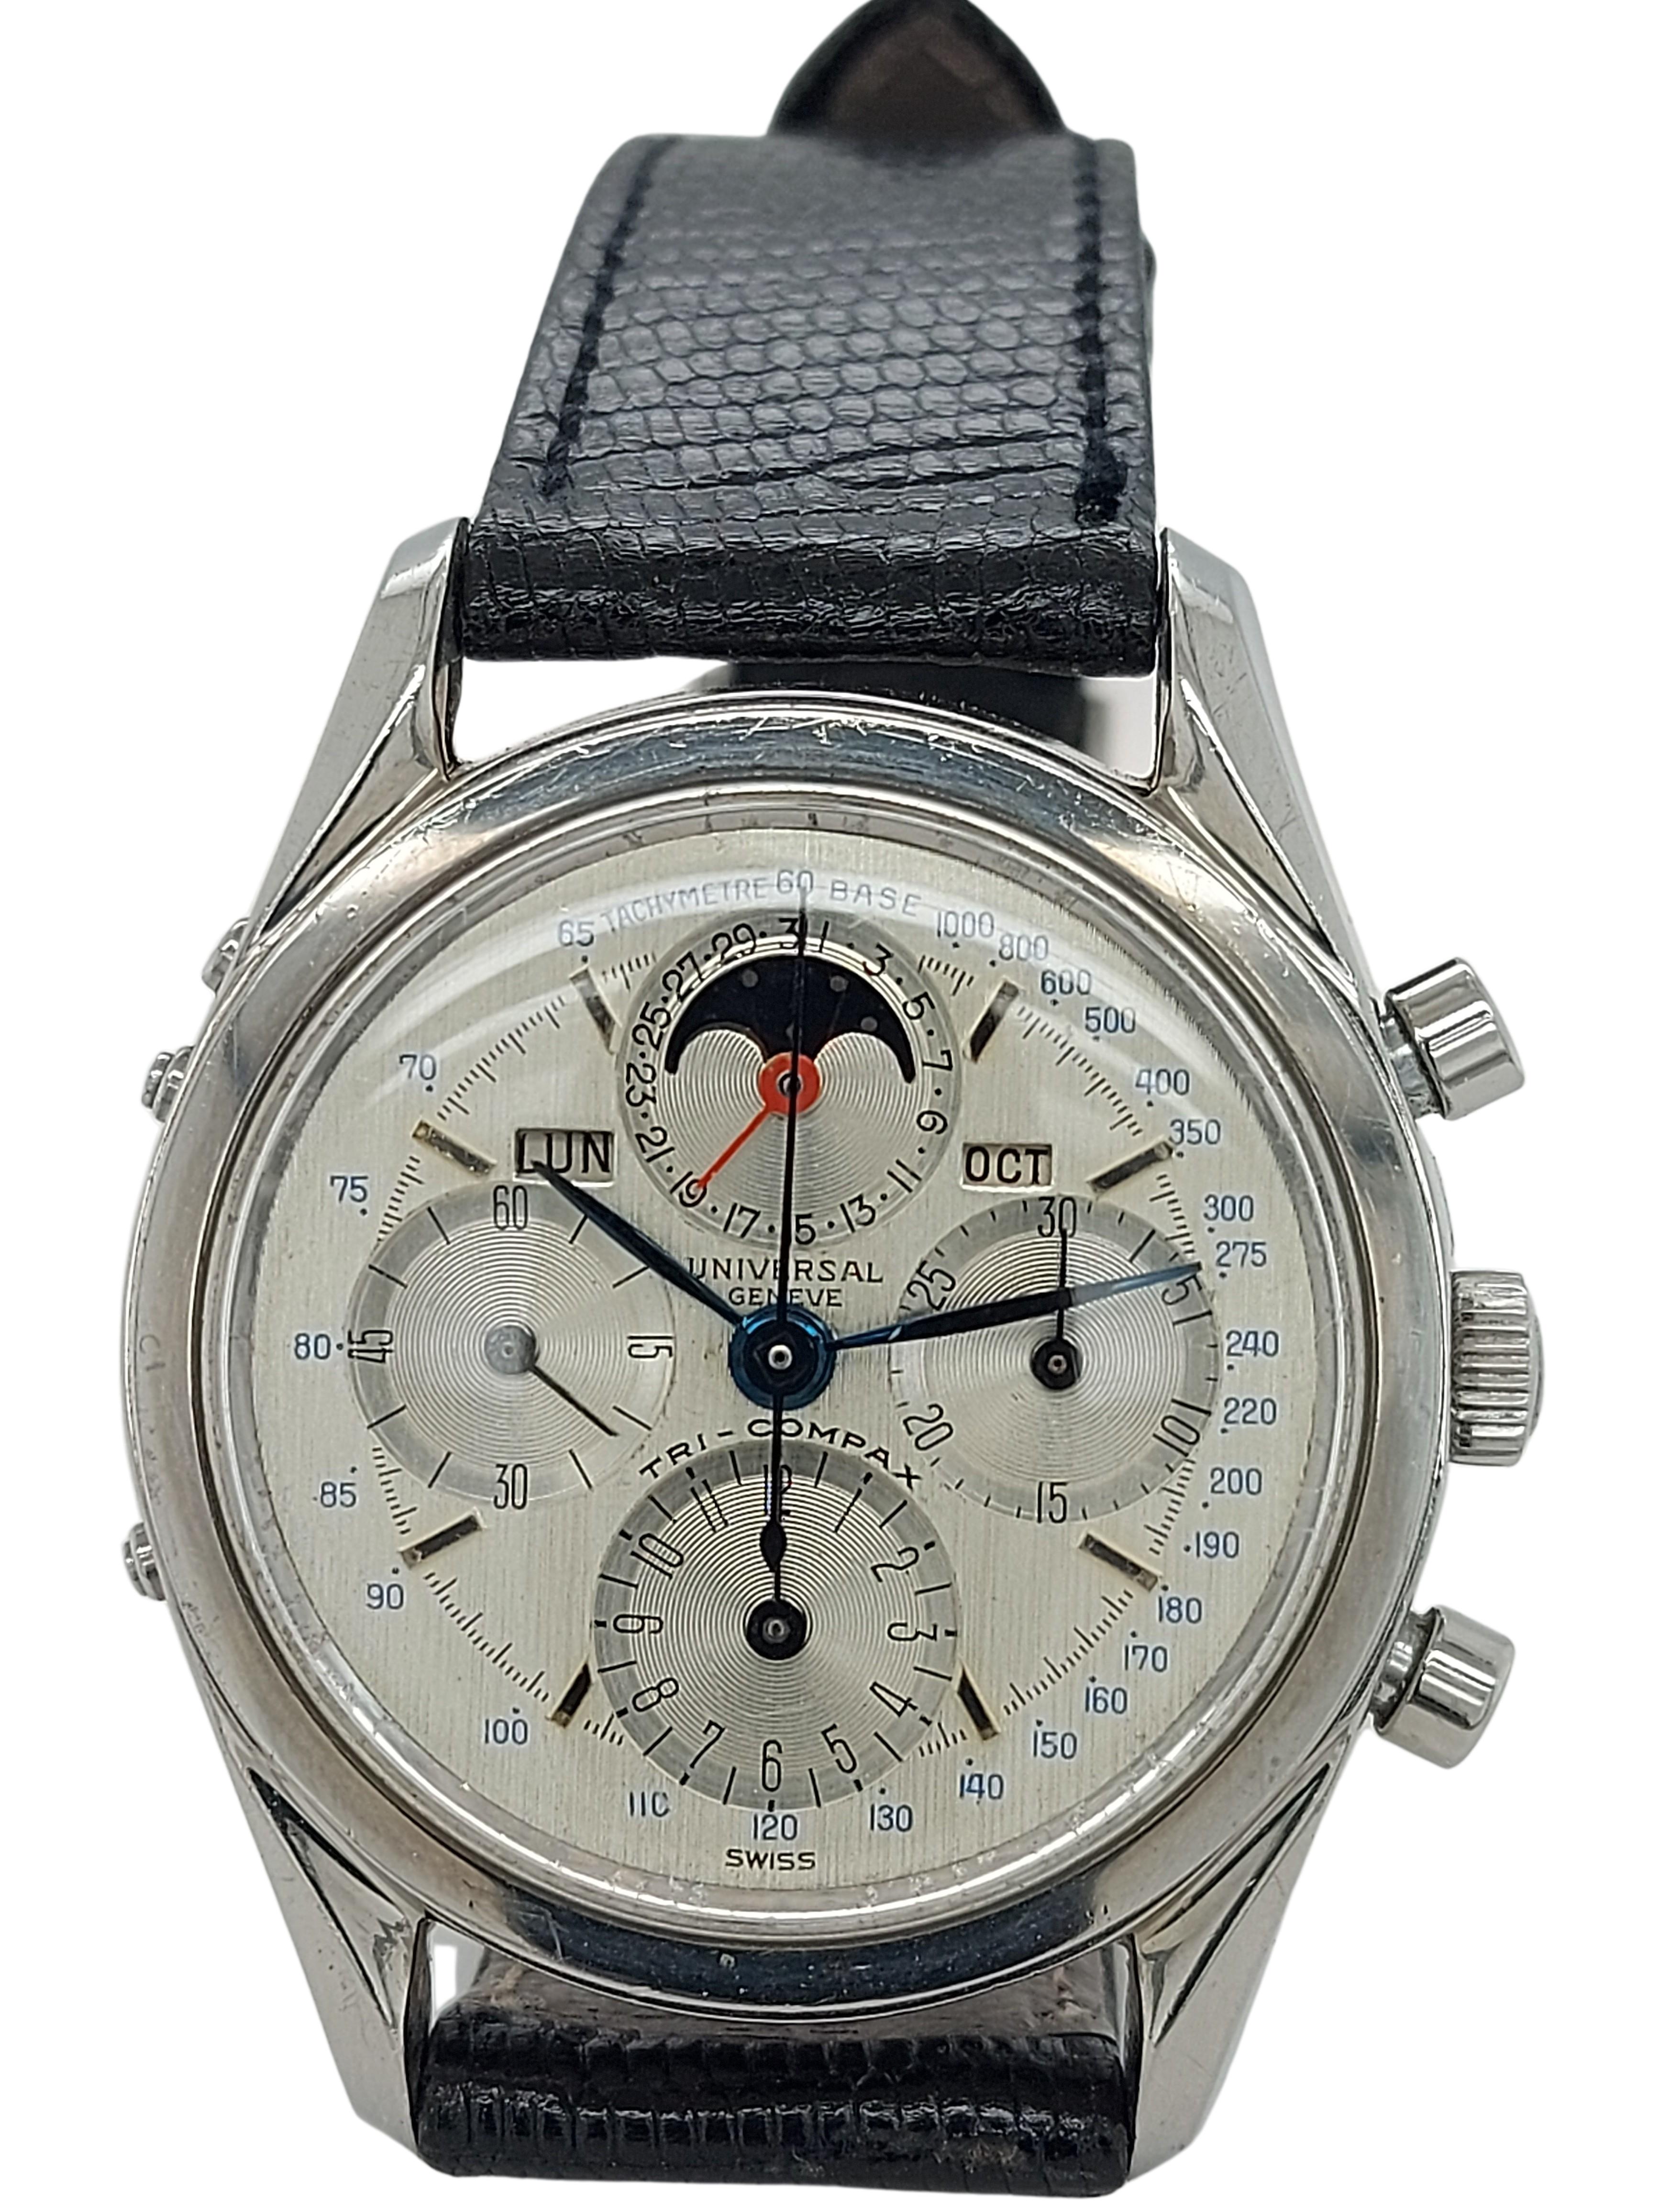 Universal Genève Tri Compax Chronograph Ref.222100,Rare Collectors Watch

Caliber : 281

Case : 36 mm Stainless Steel

A rare Universal TRI-COMPAX chronograph watch.

The movement and case of this watch are in really good condition.

Universal